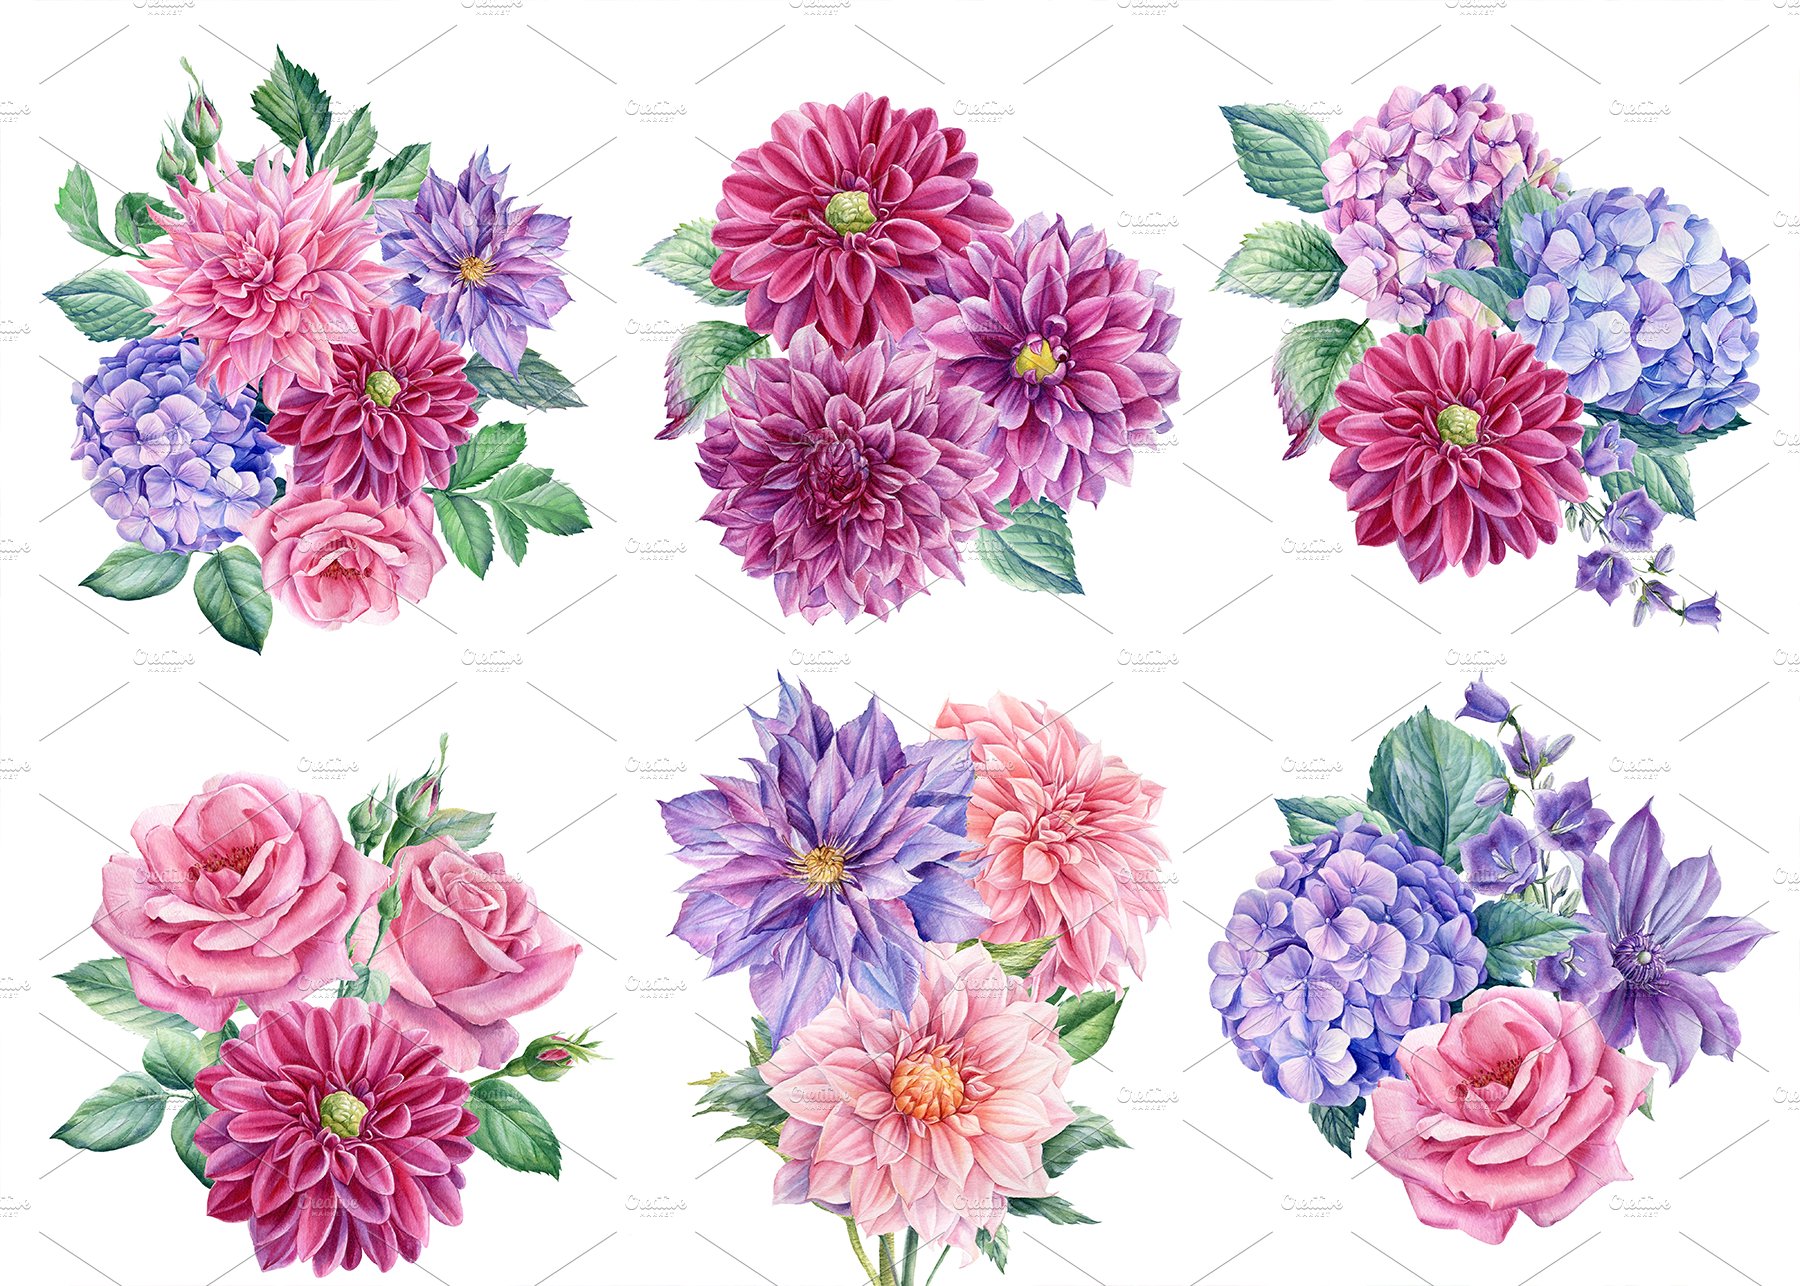 All flowers and leaves have a transparent background, making them easy to just pop in where you need them.